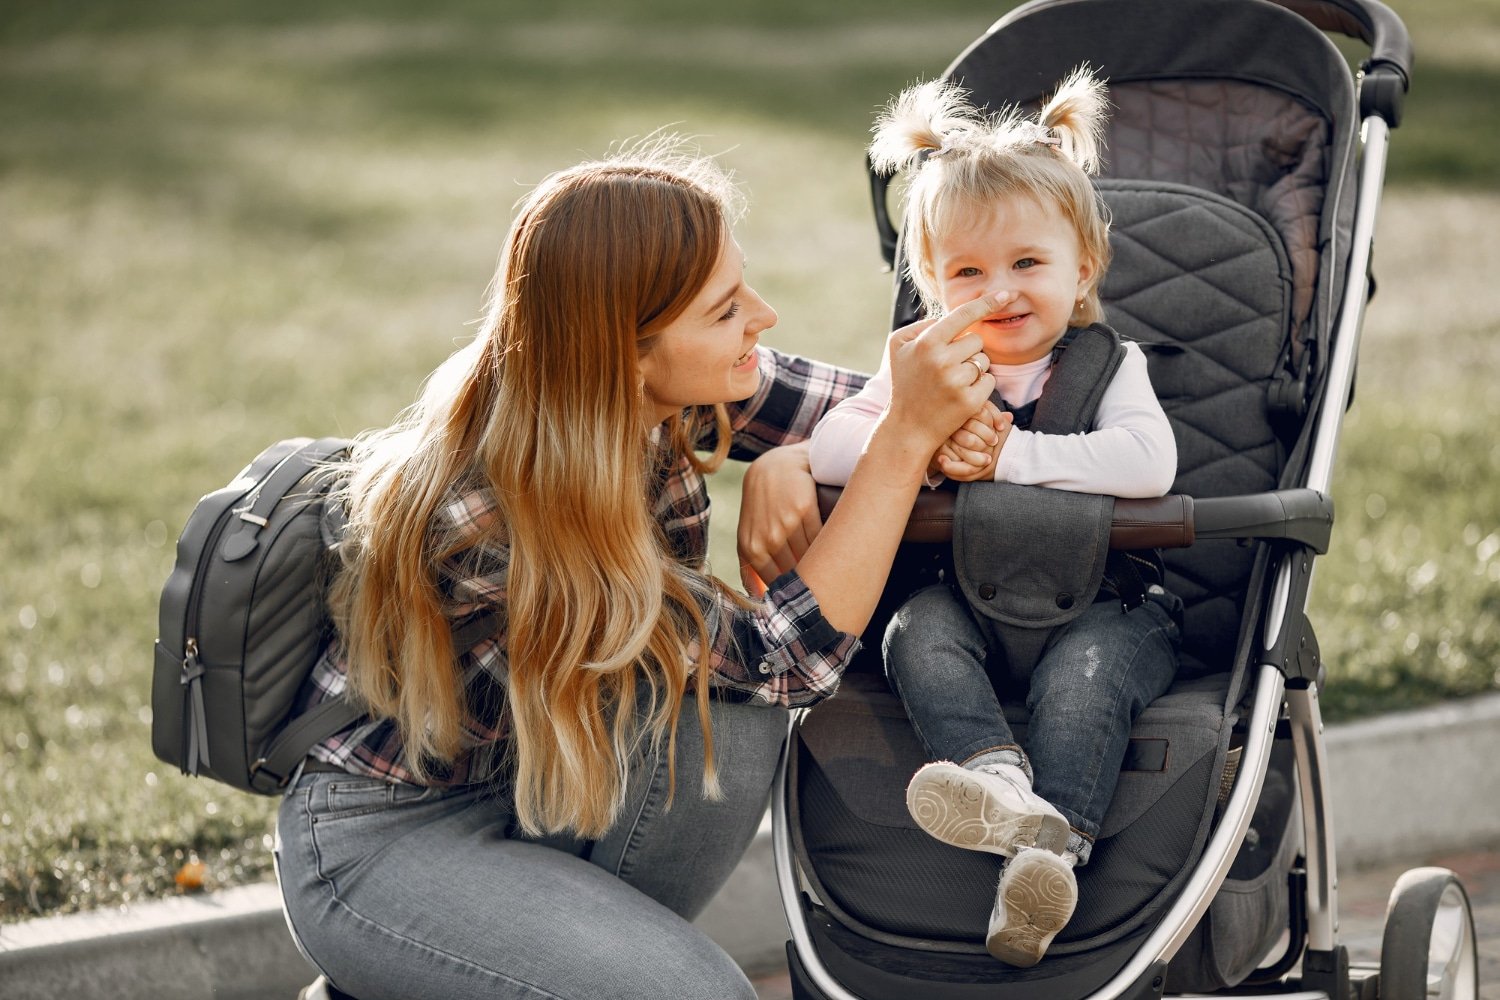 Baby Safety with Evenflo Baby: Trusted Car Seats and Baby Gear in 2024